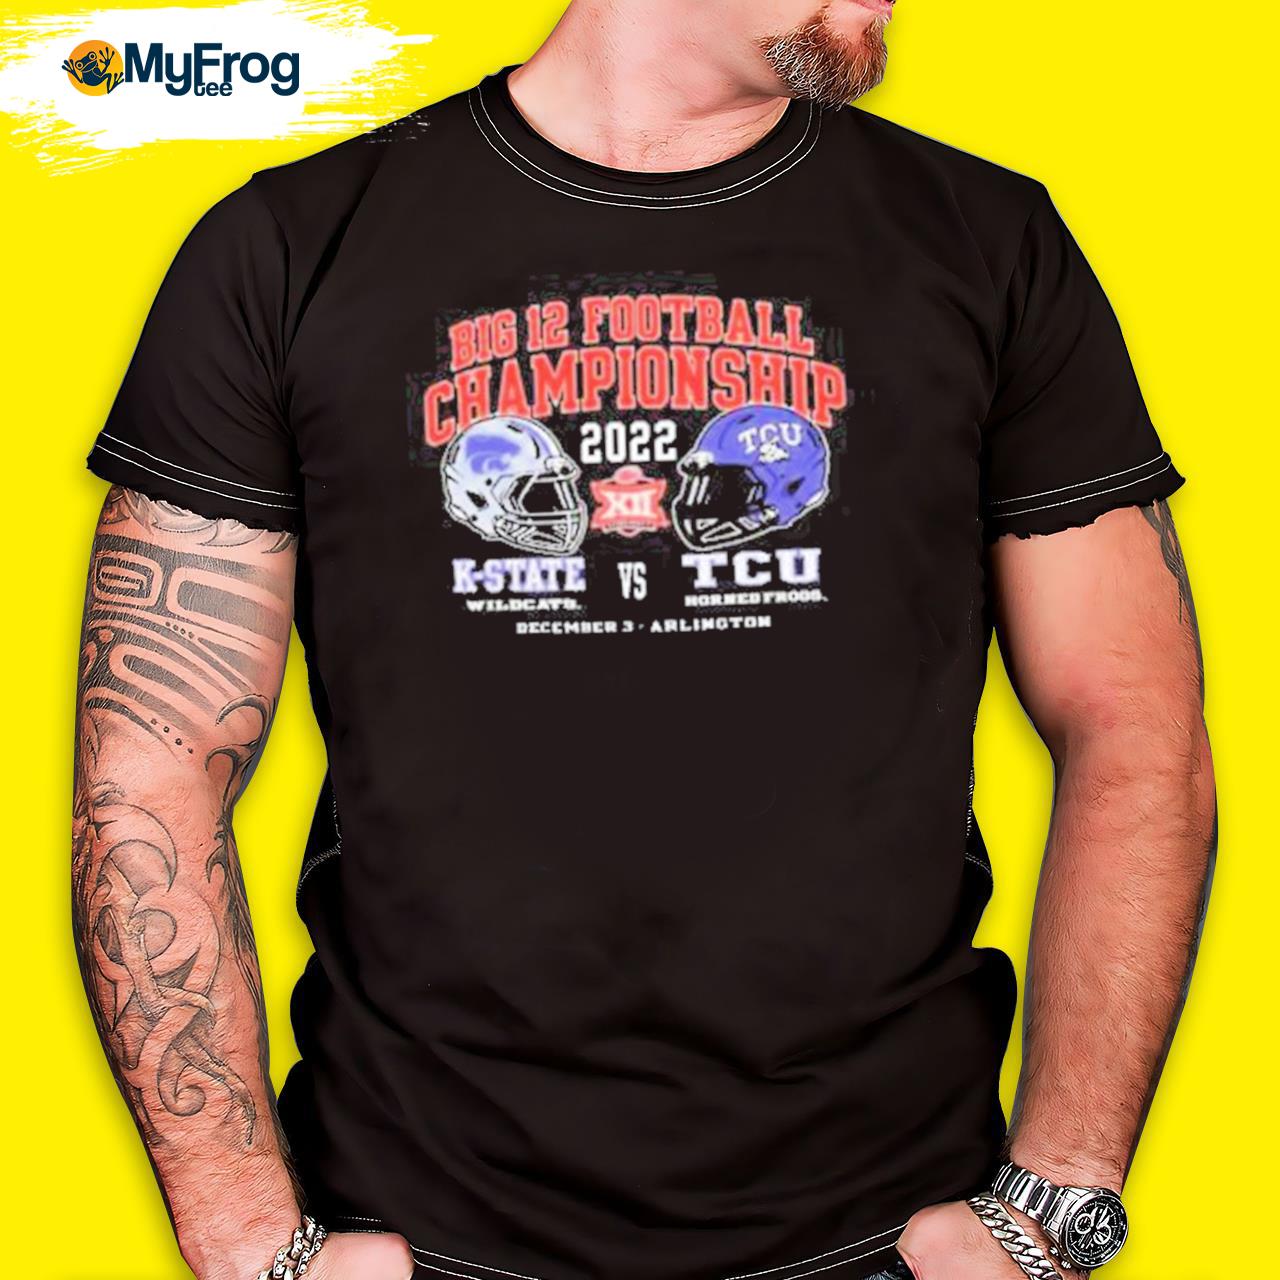 Official Big 12 Football Championship 2022 Tcu Horned Frogs Vs K State Wildcats Tee shirt